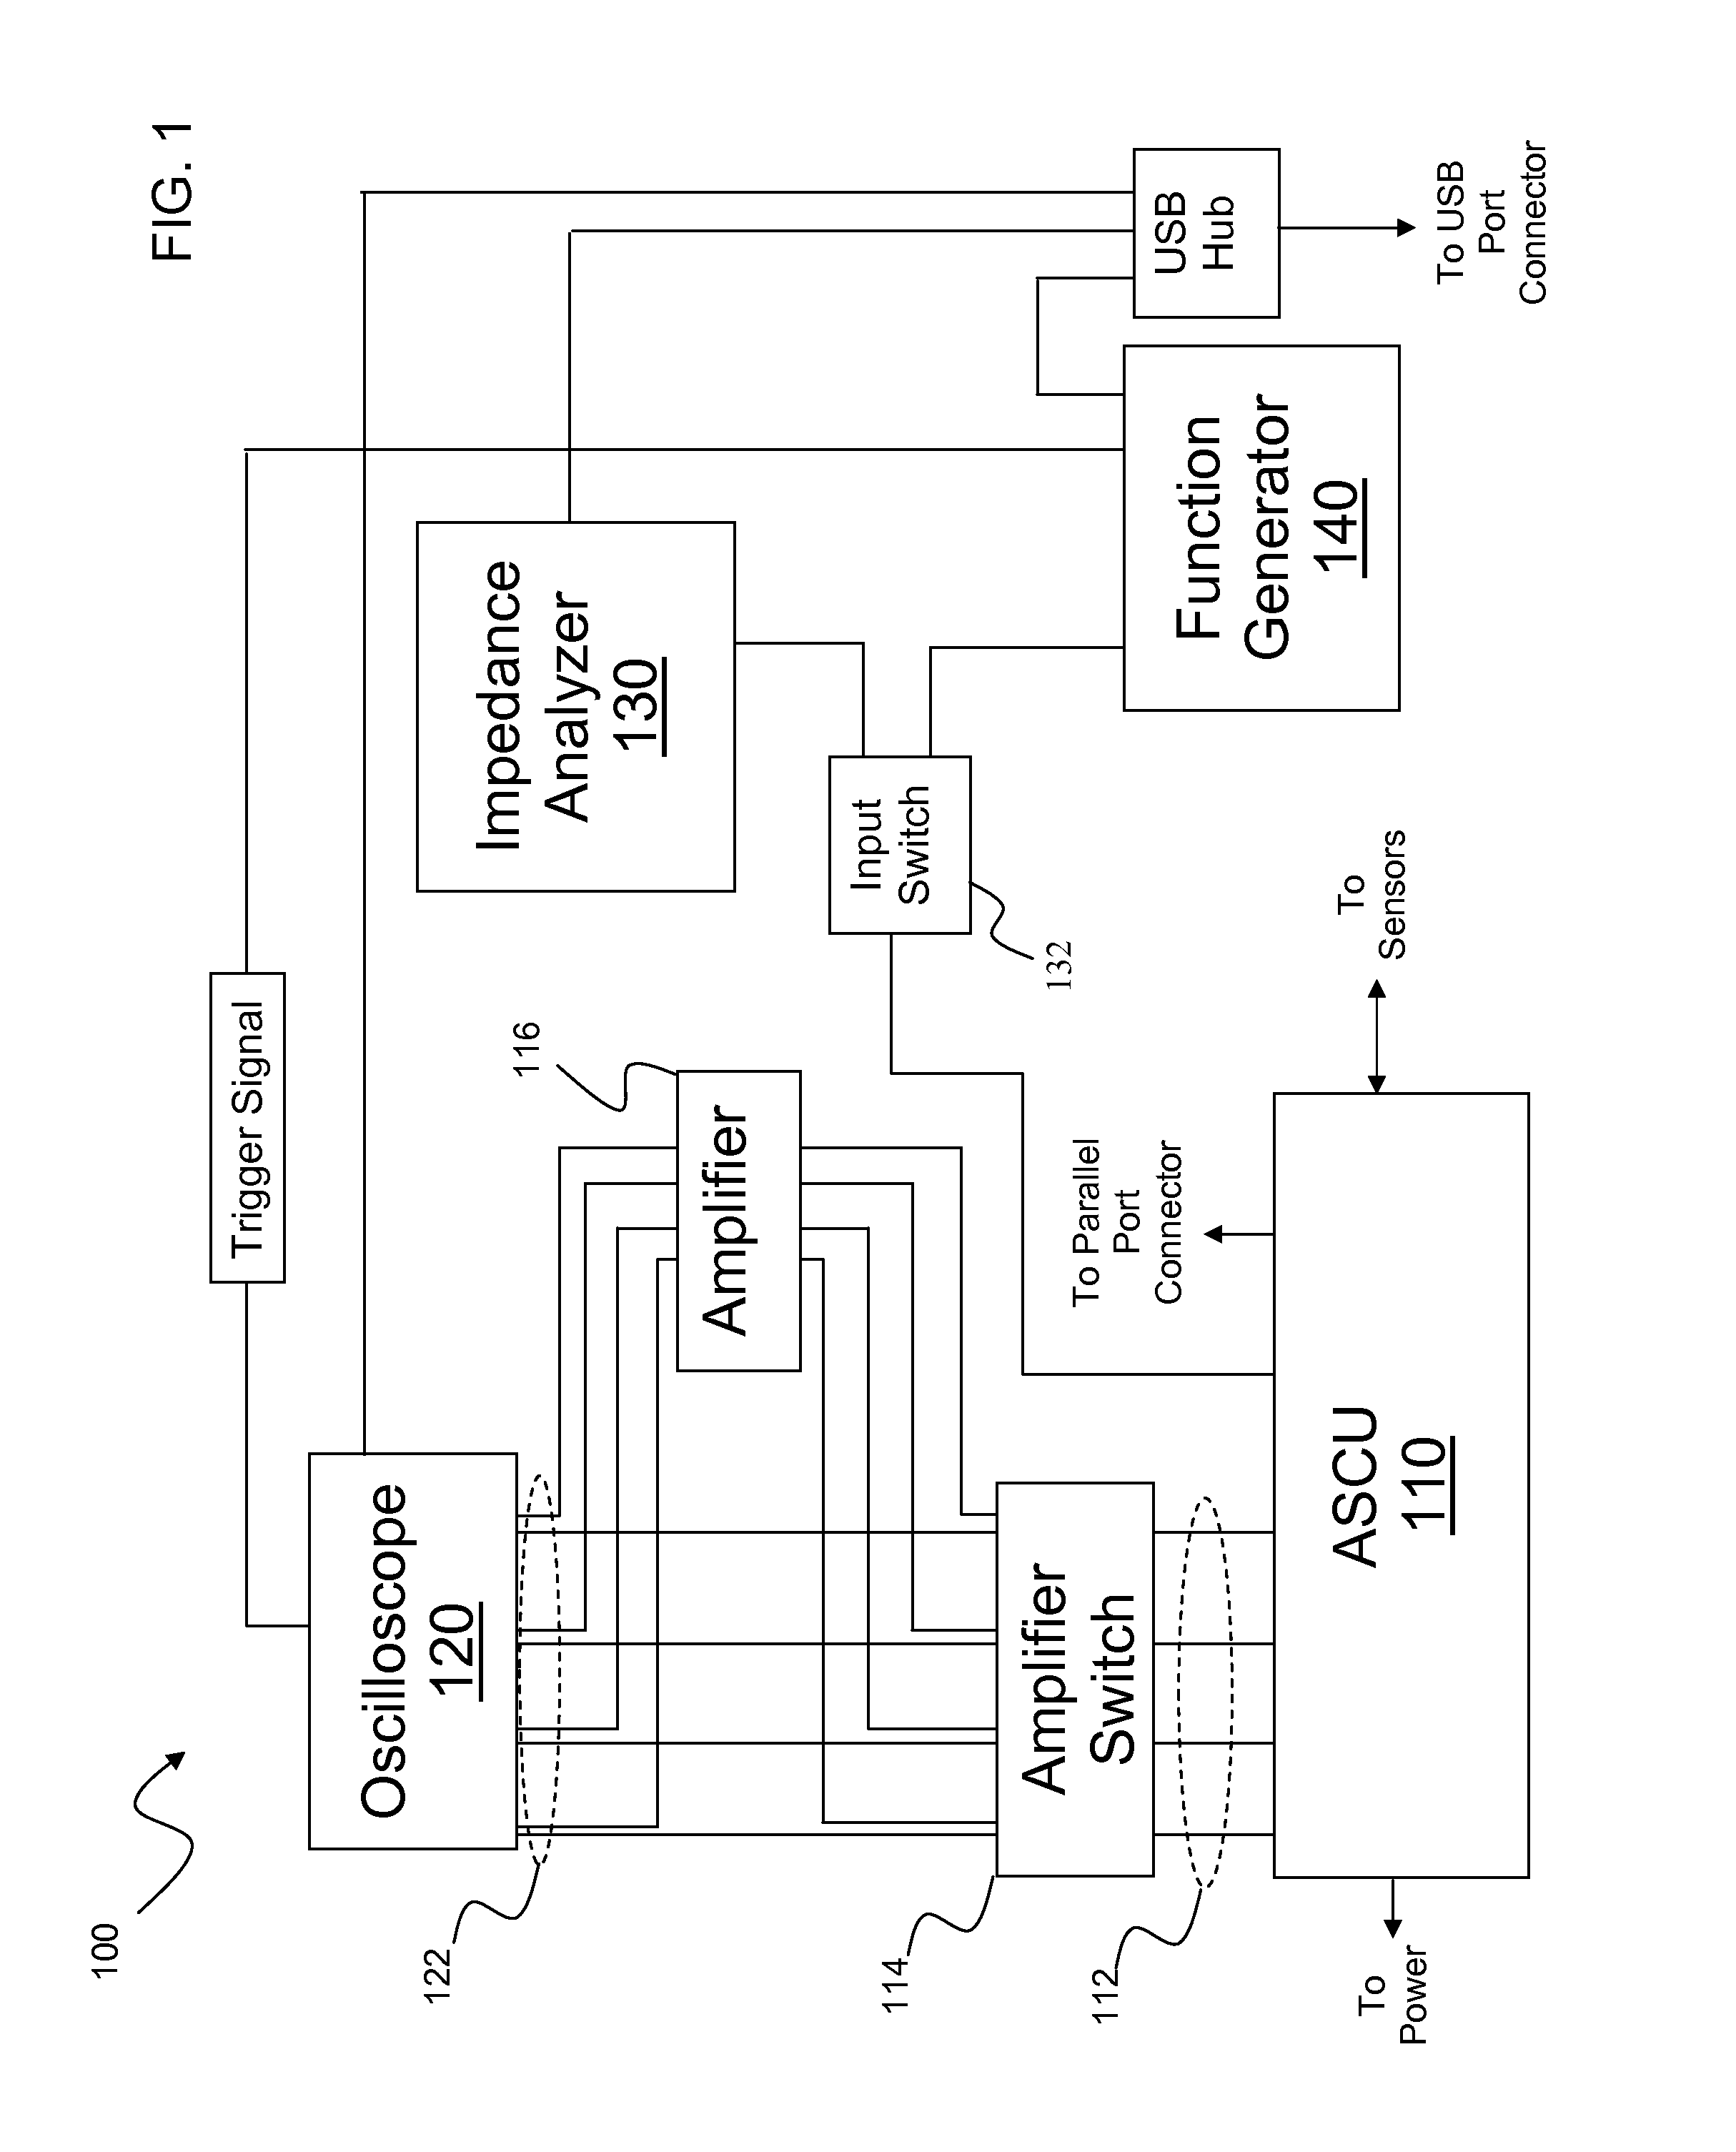 Structural Health Monitoring Apparatus and Methodology